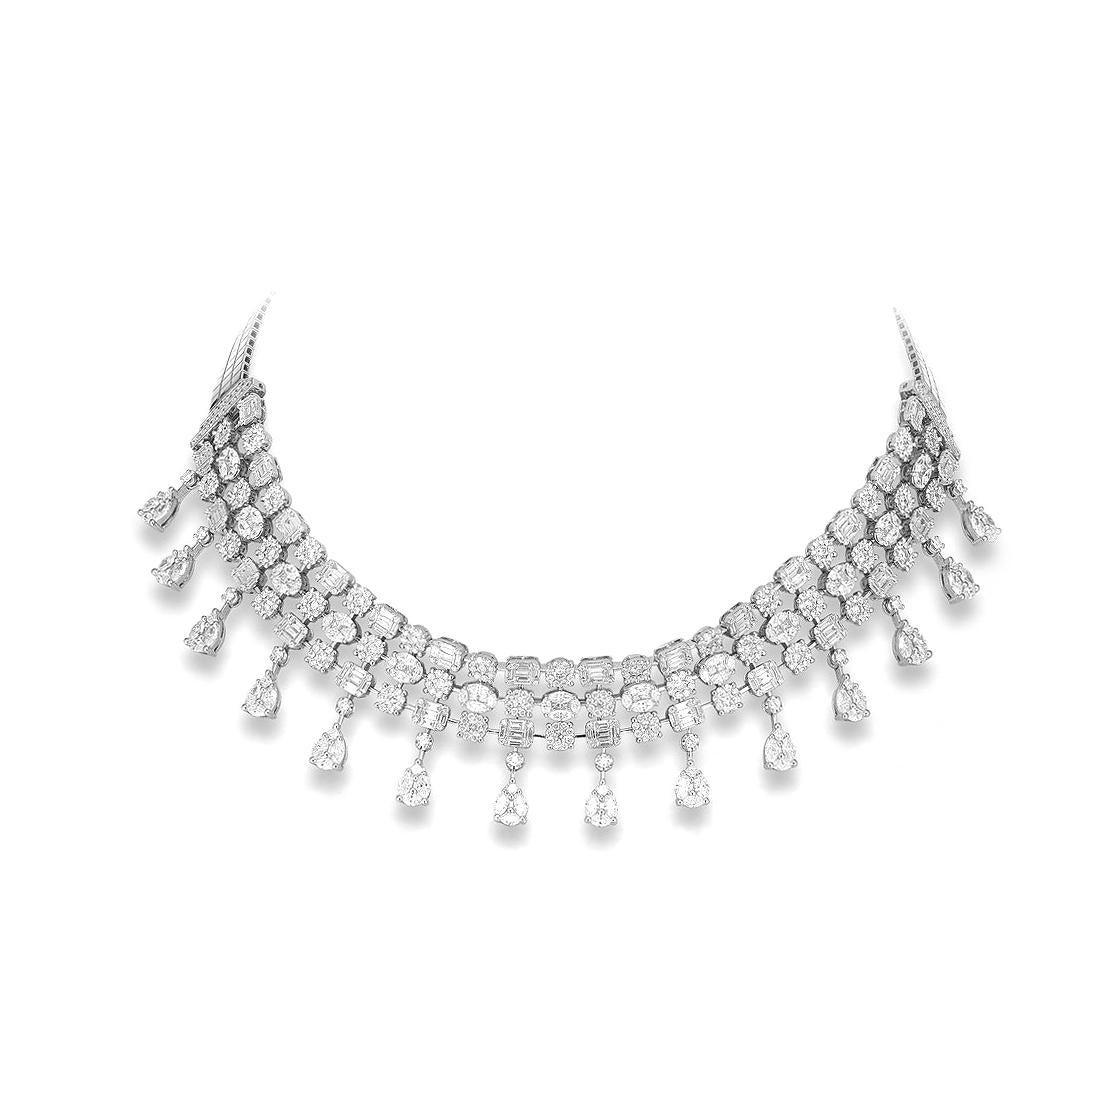 Necklace in 18kt white gold set with 274 princess, marquise and baguette cut diamonds 12.11 cts and 534 diamonds 6.70 cts          